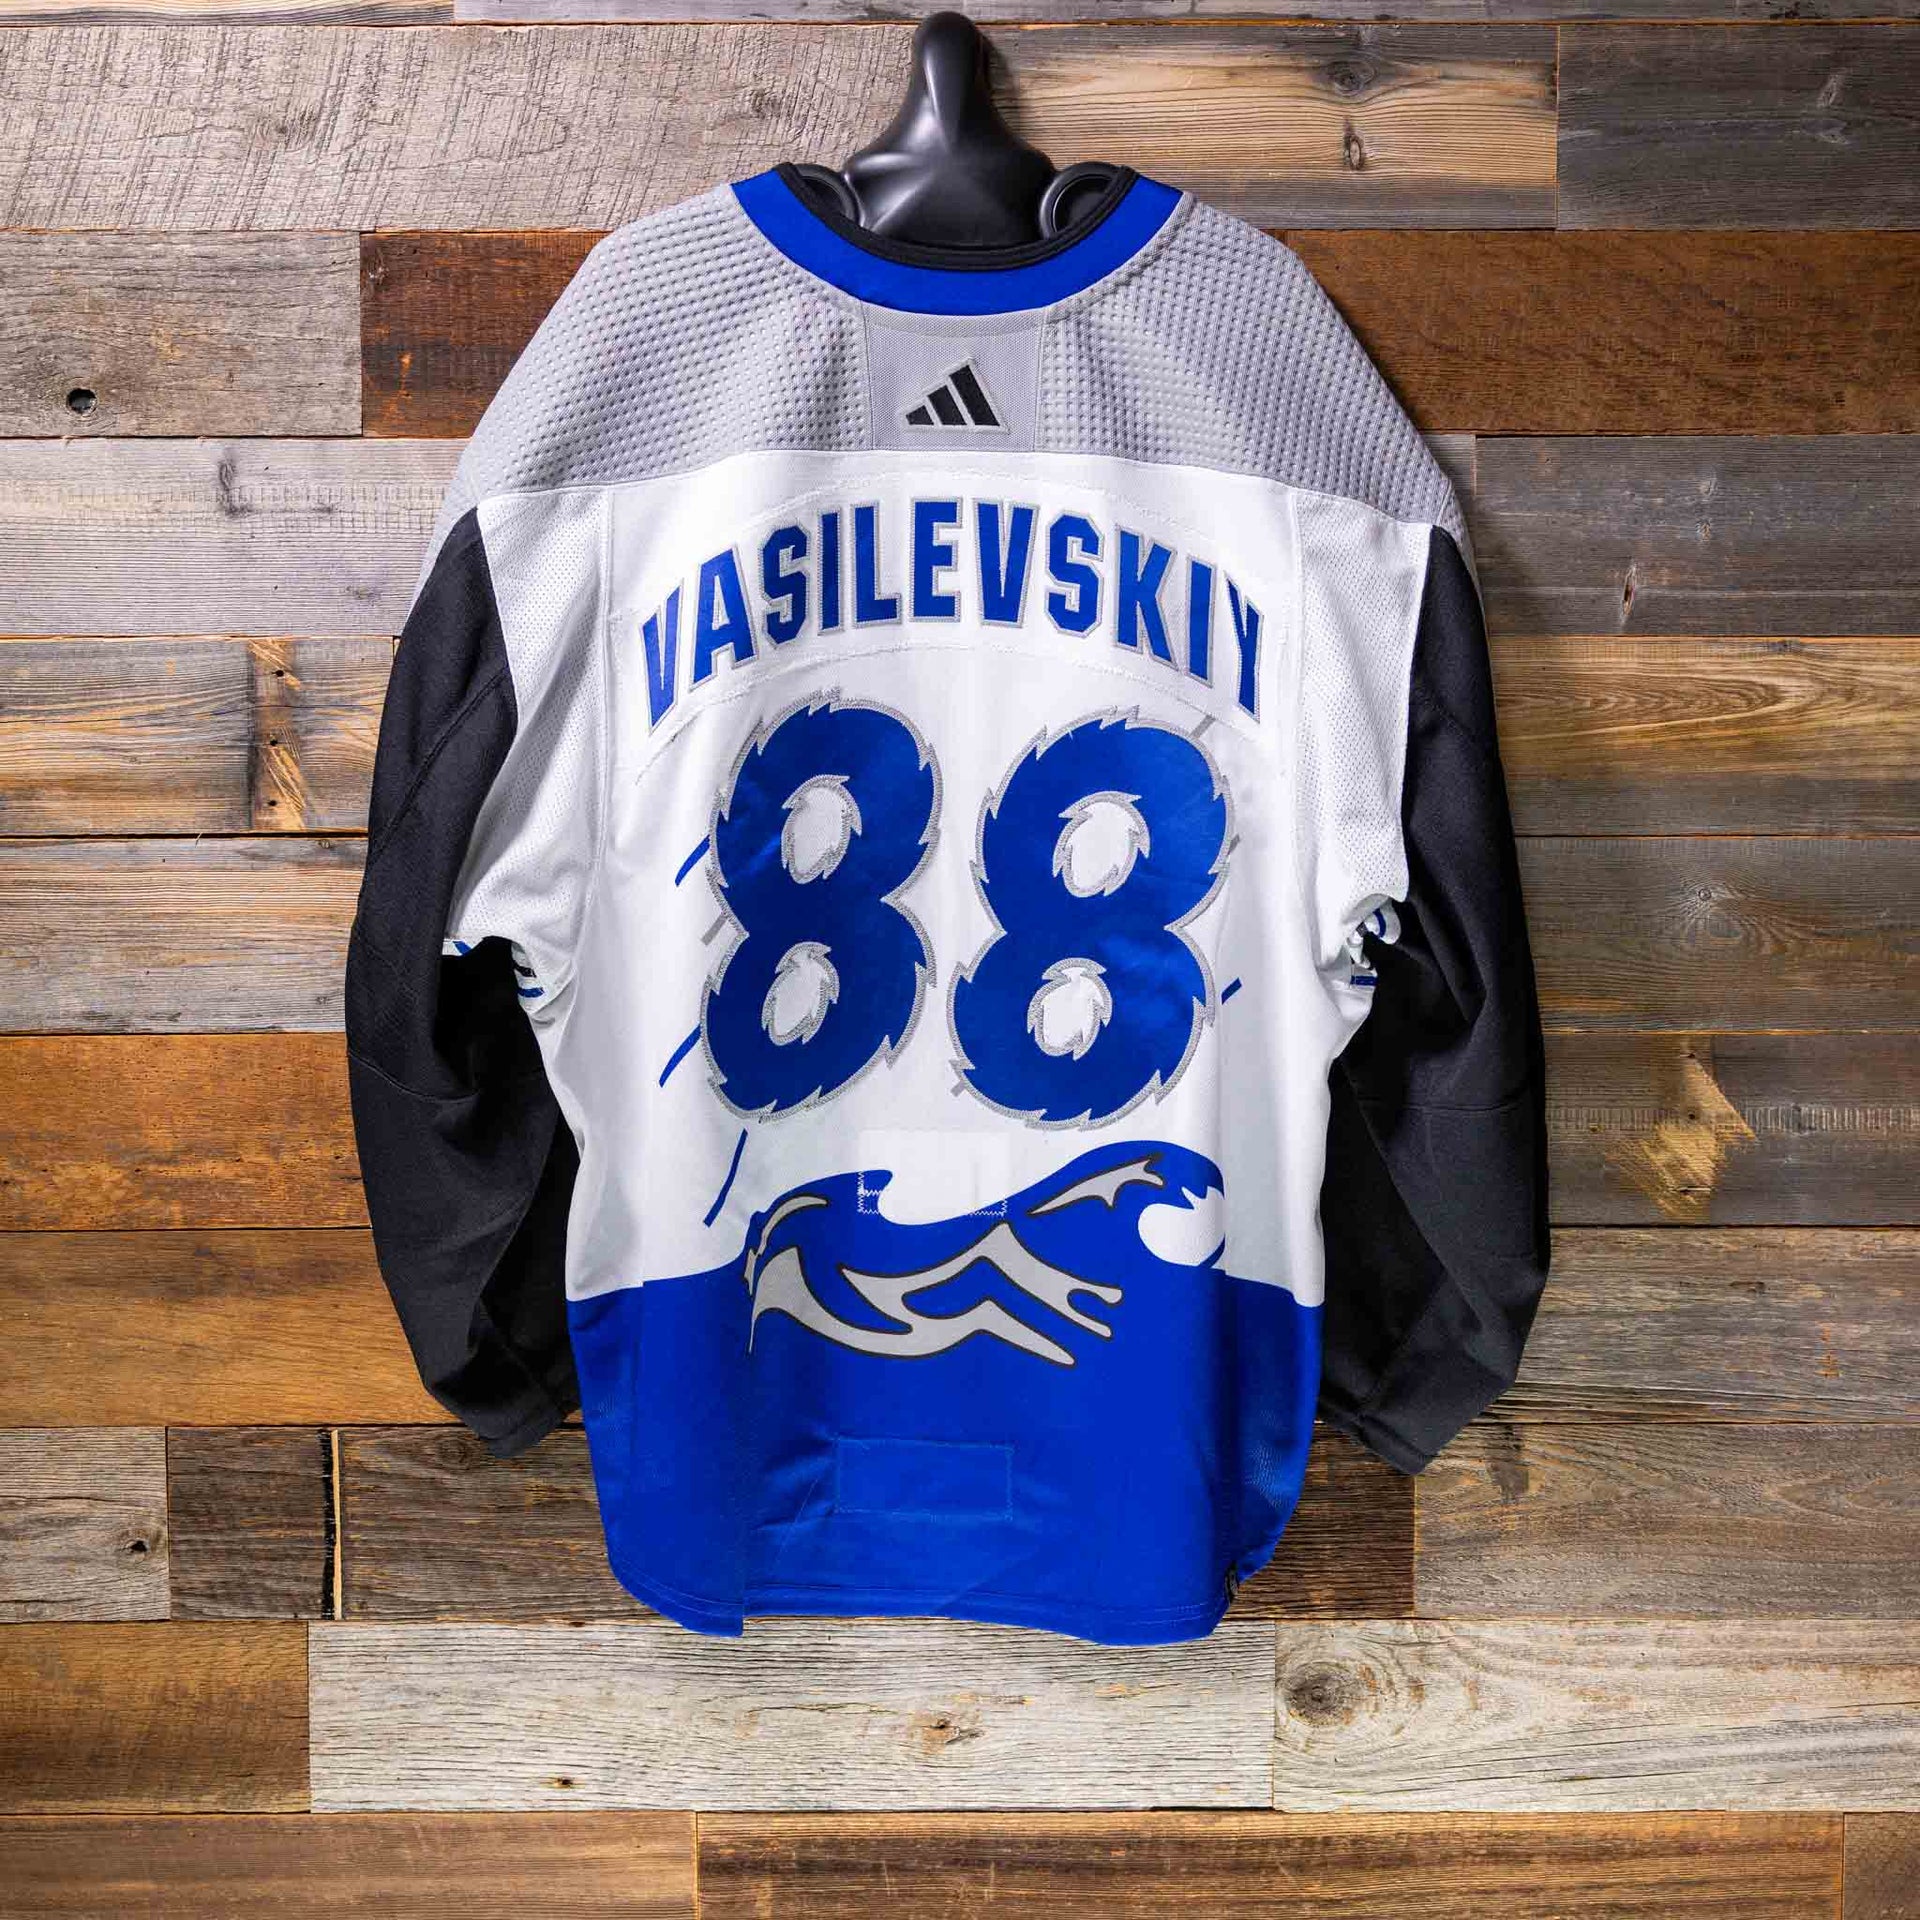 Tampa Bay Lightning Reverse Retro gear available now